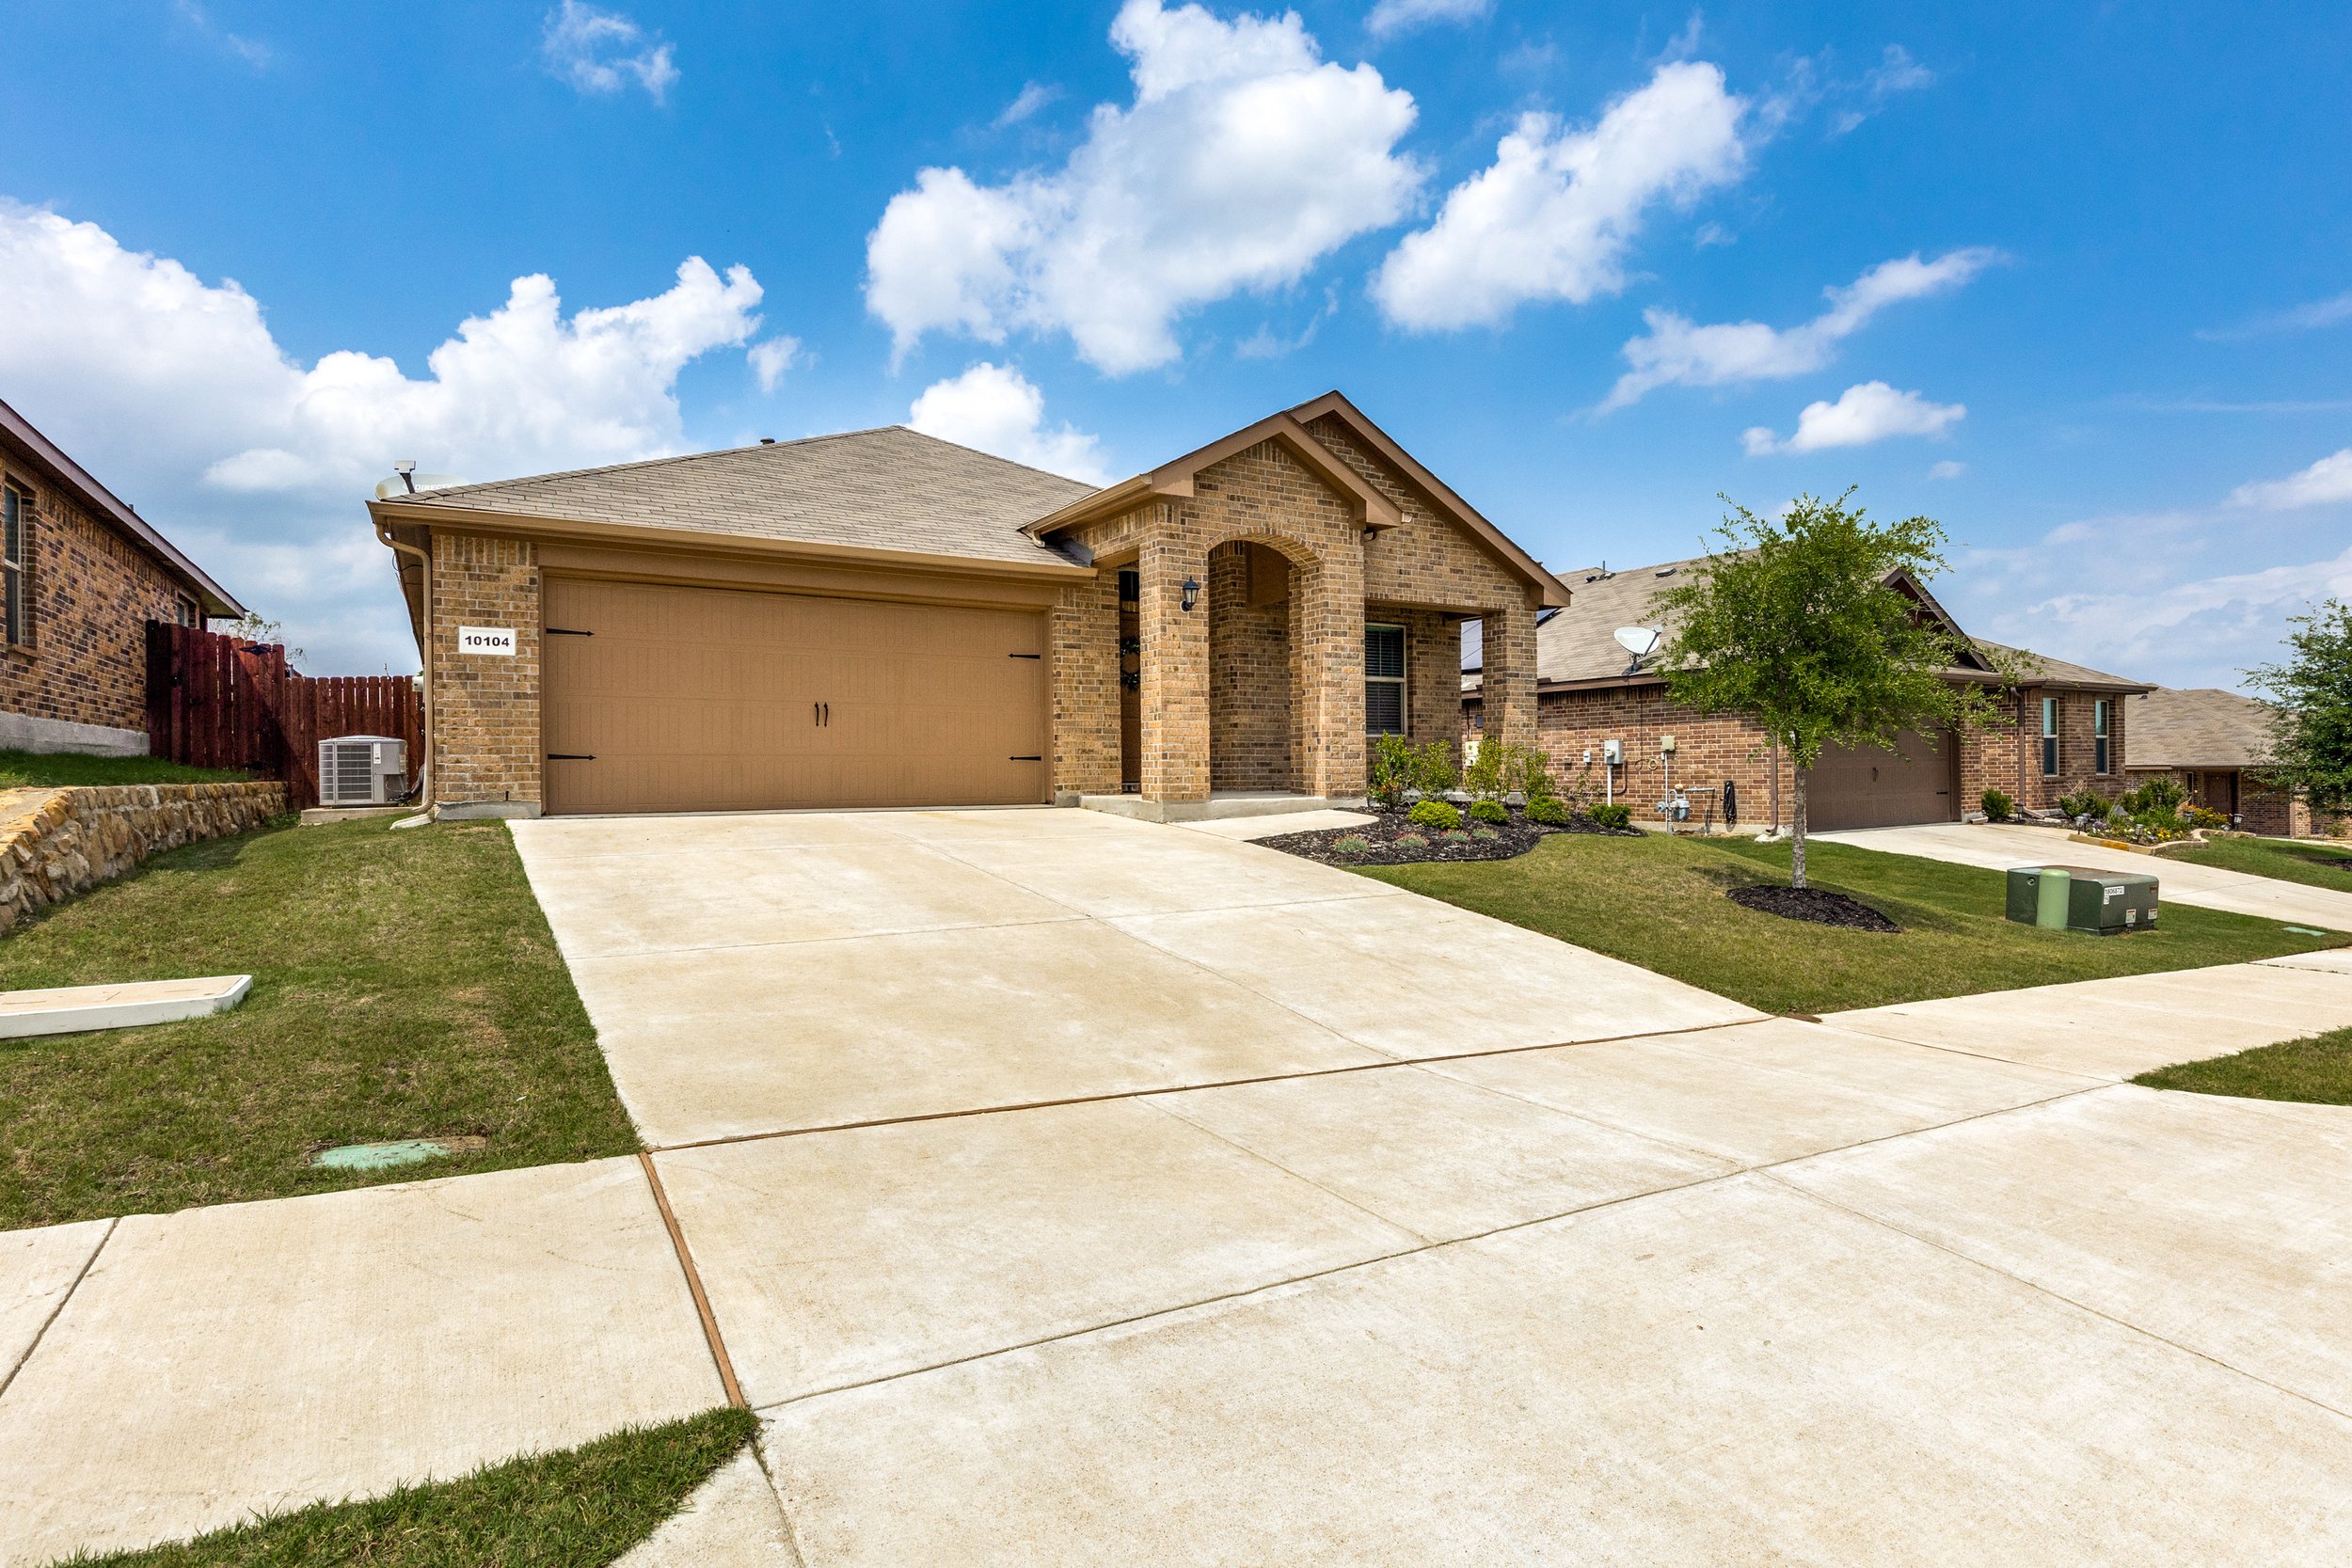 10104-clemmons-rd-fort-worth-tx-76108-High-Res-2.jpg